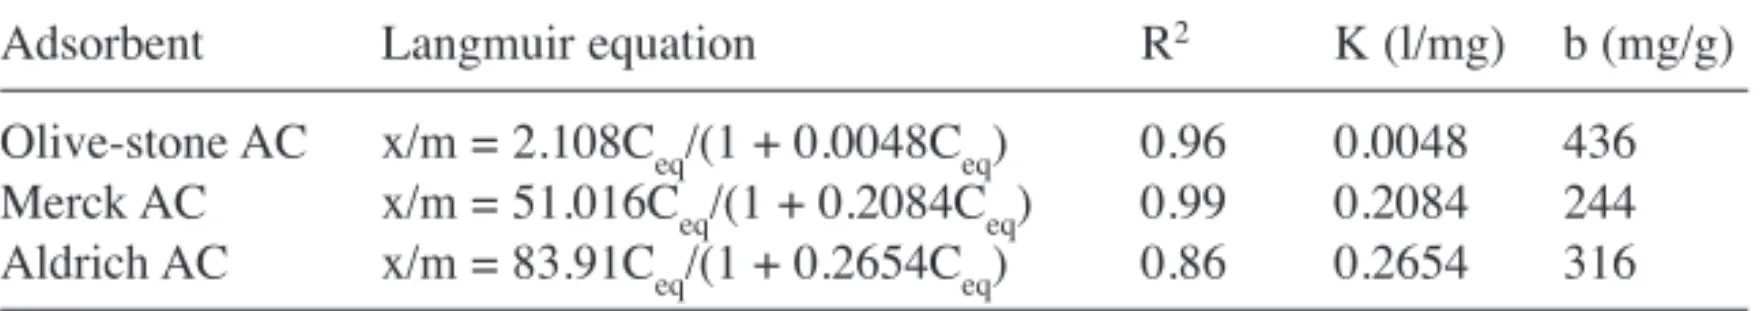 TABLE 3. Langmuir Equations and Constants for Phenol Adsorption by Olive-stone, Aldrich and Merck Activated Carbons (AC)